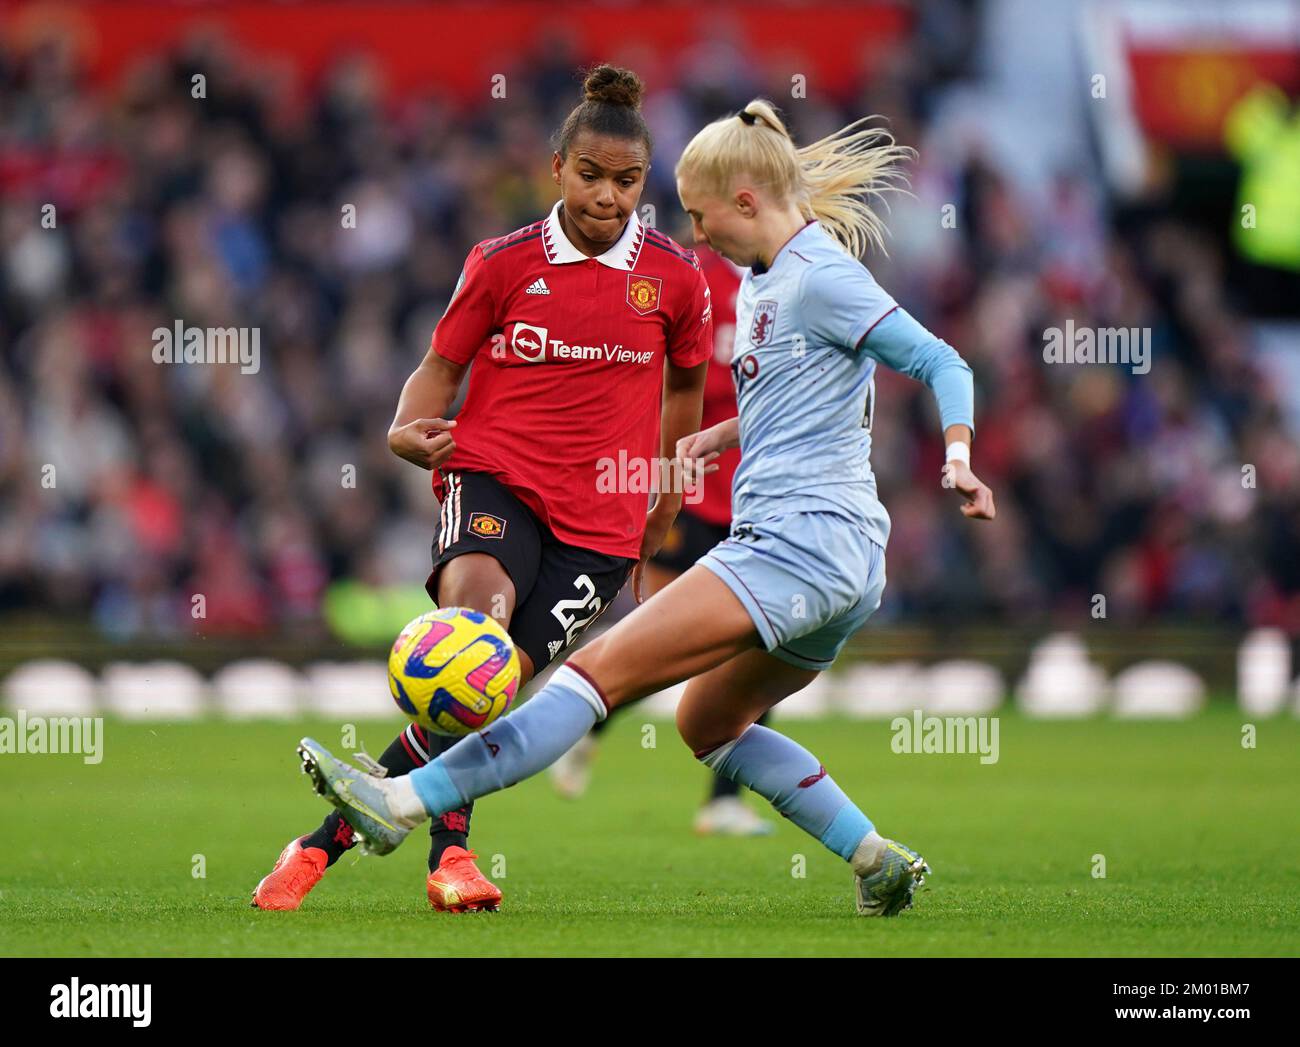 Manchester United's Nikita Parris (left) and Aston Villa's Laura Blindkilde battle for the ball during the Barclays Women's Super League match at Old Trafford, Manchester. Picture date: Saturday December 3, 2022. Stock Photo